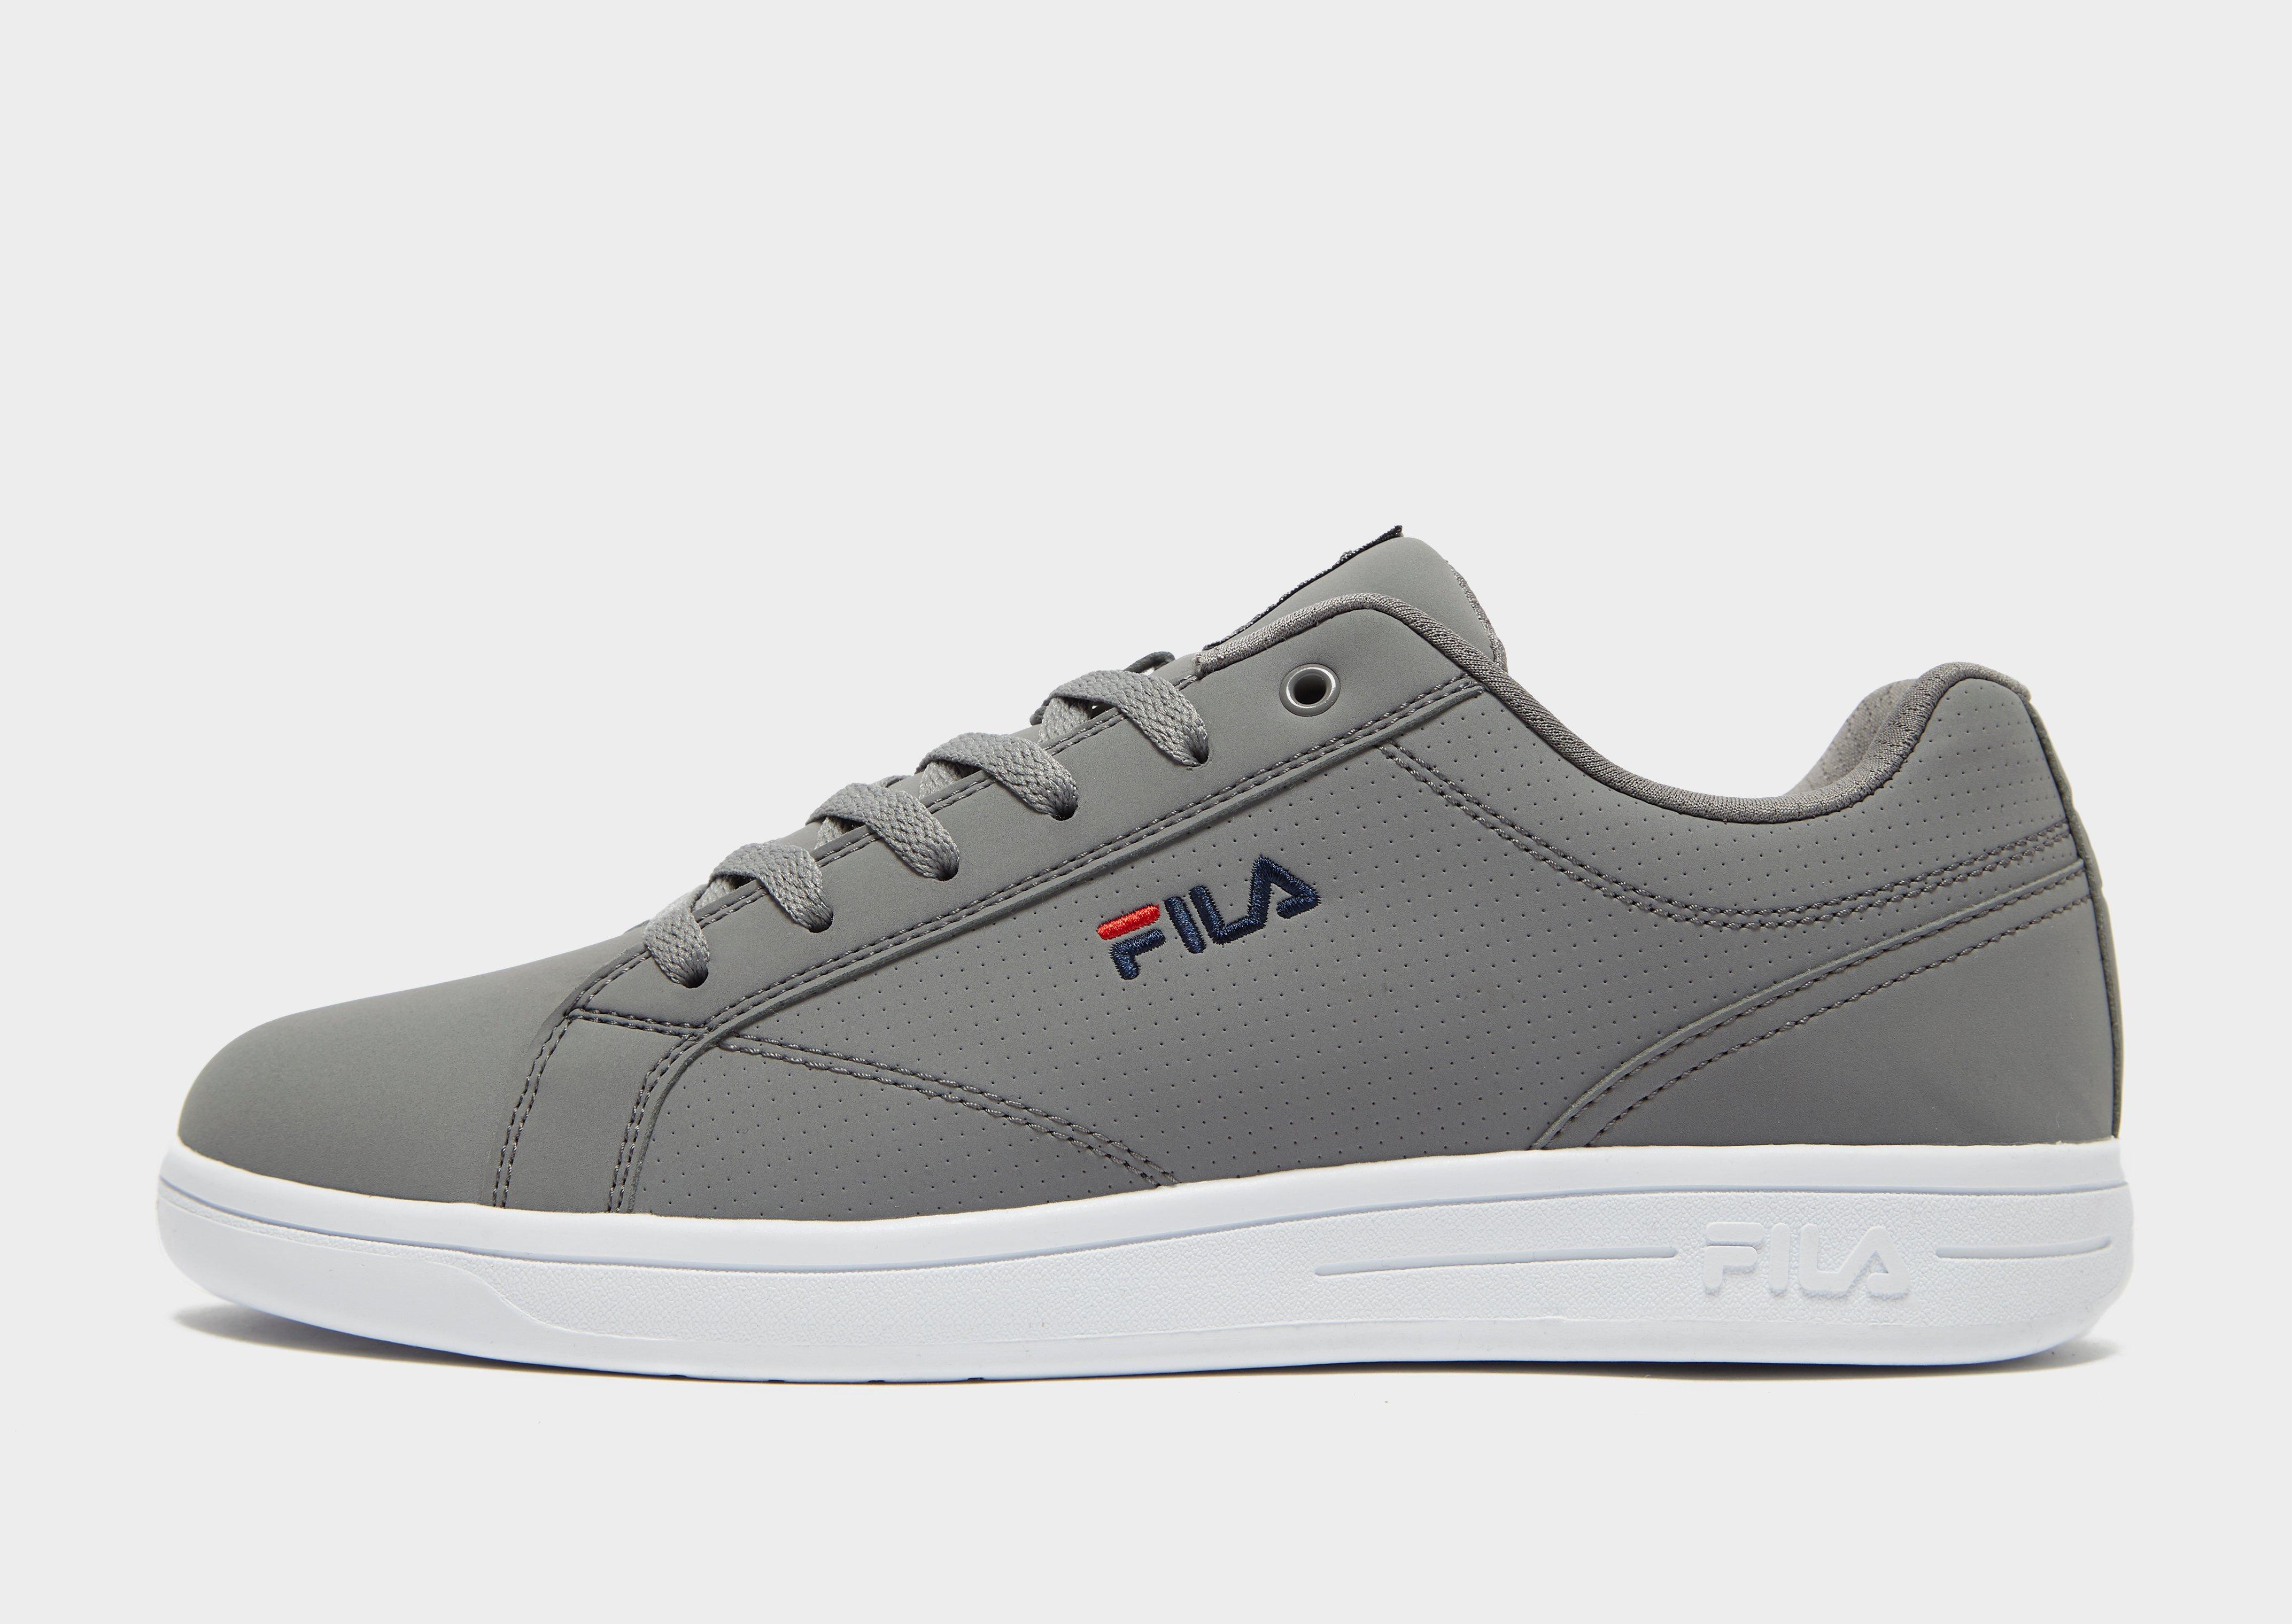 fila chaussure homme 2015